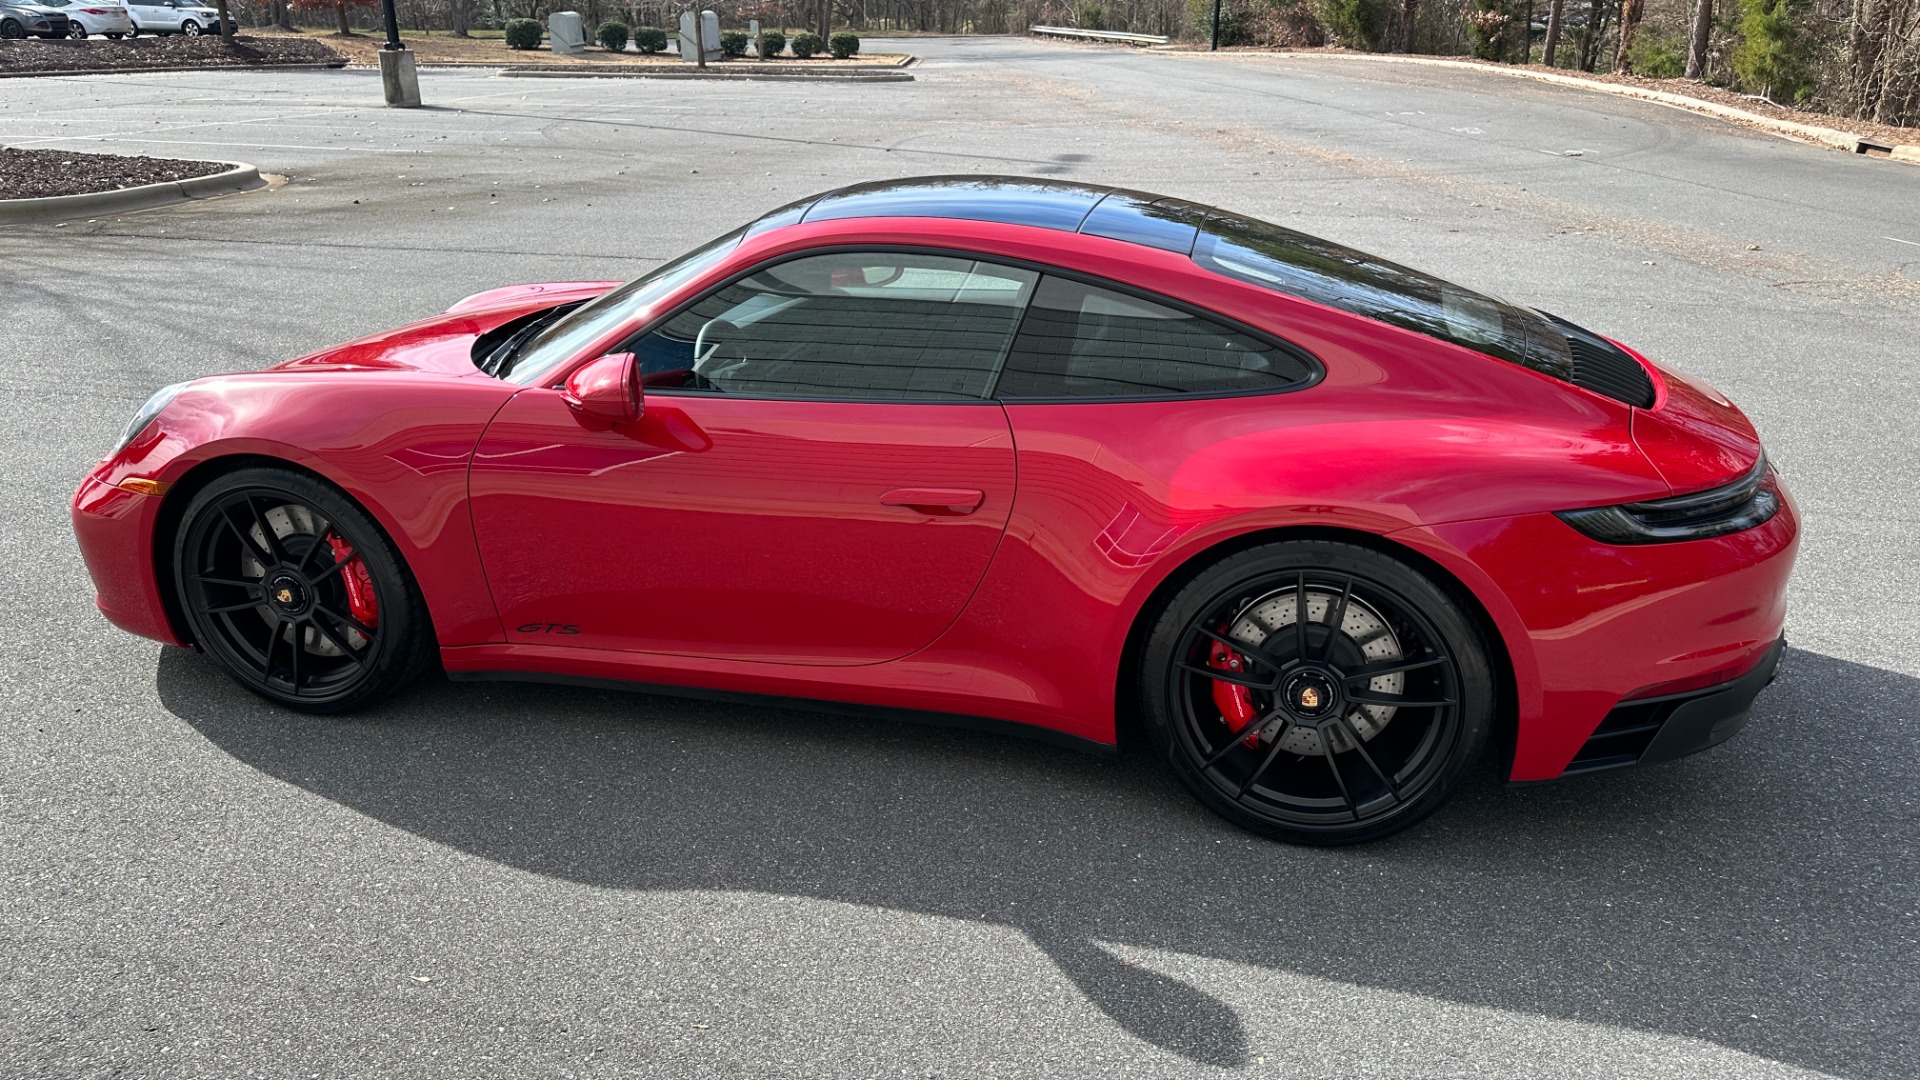 Used 2023 Porsche 911 CARRERA GTS / 18 WAY SPORT SEATS / FRONT LIFT / REAR AXLE STEERING for sale $181,900 at Formula Imports in Charlotte NC 28227 3